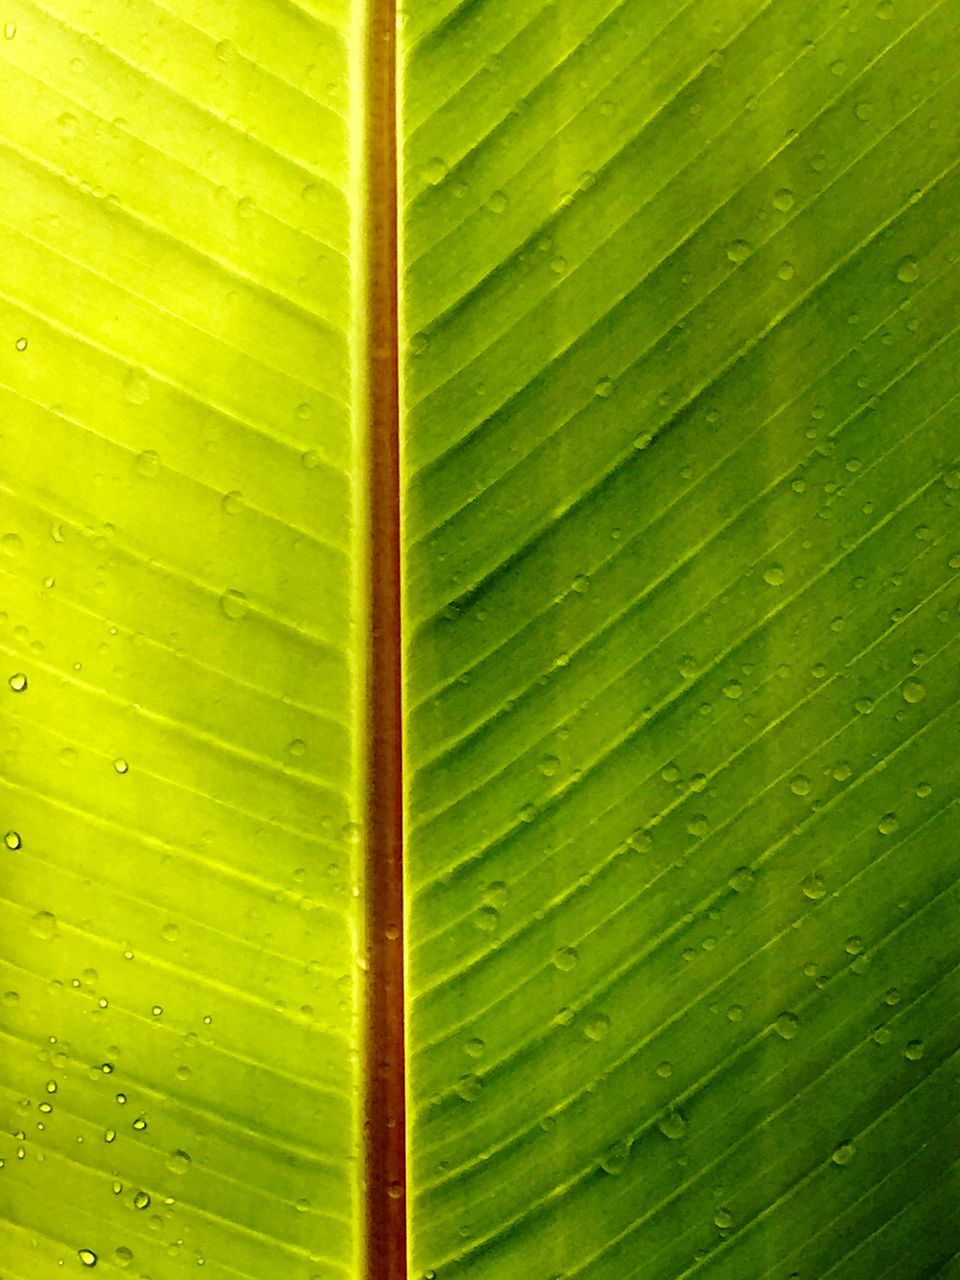 leaf, green color, full frame, backgrounds, leaf vein, close-up, drop, growth, natural pattern, nature, wet, green, pattern, water, beauty in nature, detail, day, outdoors, textured, no people